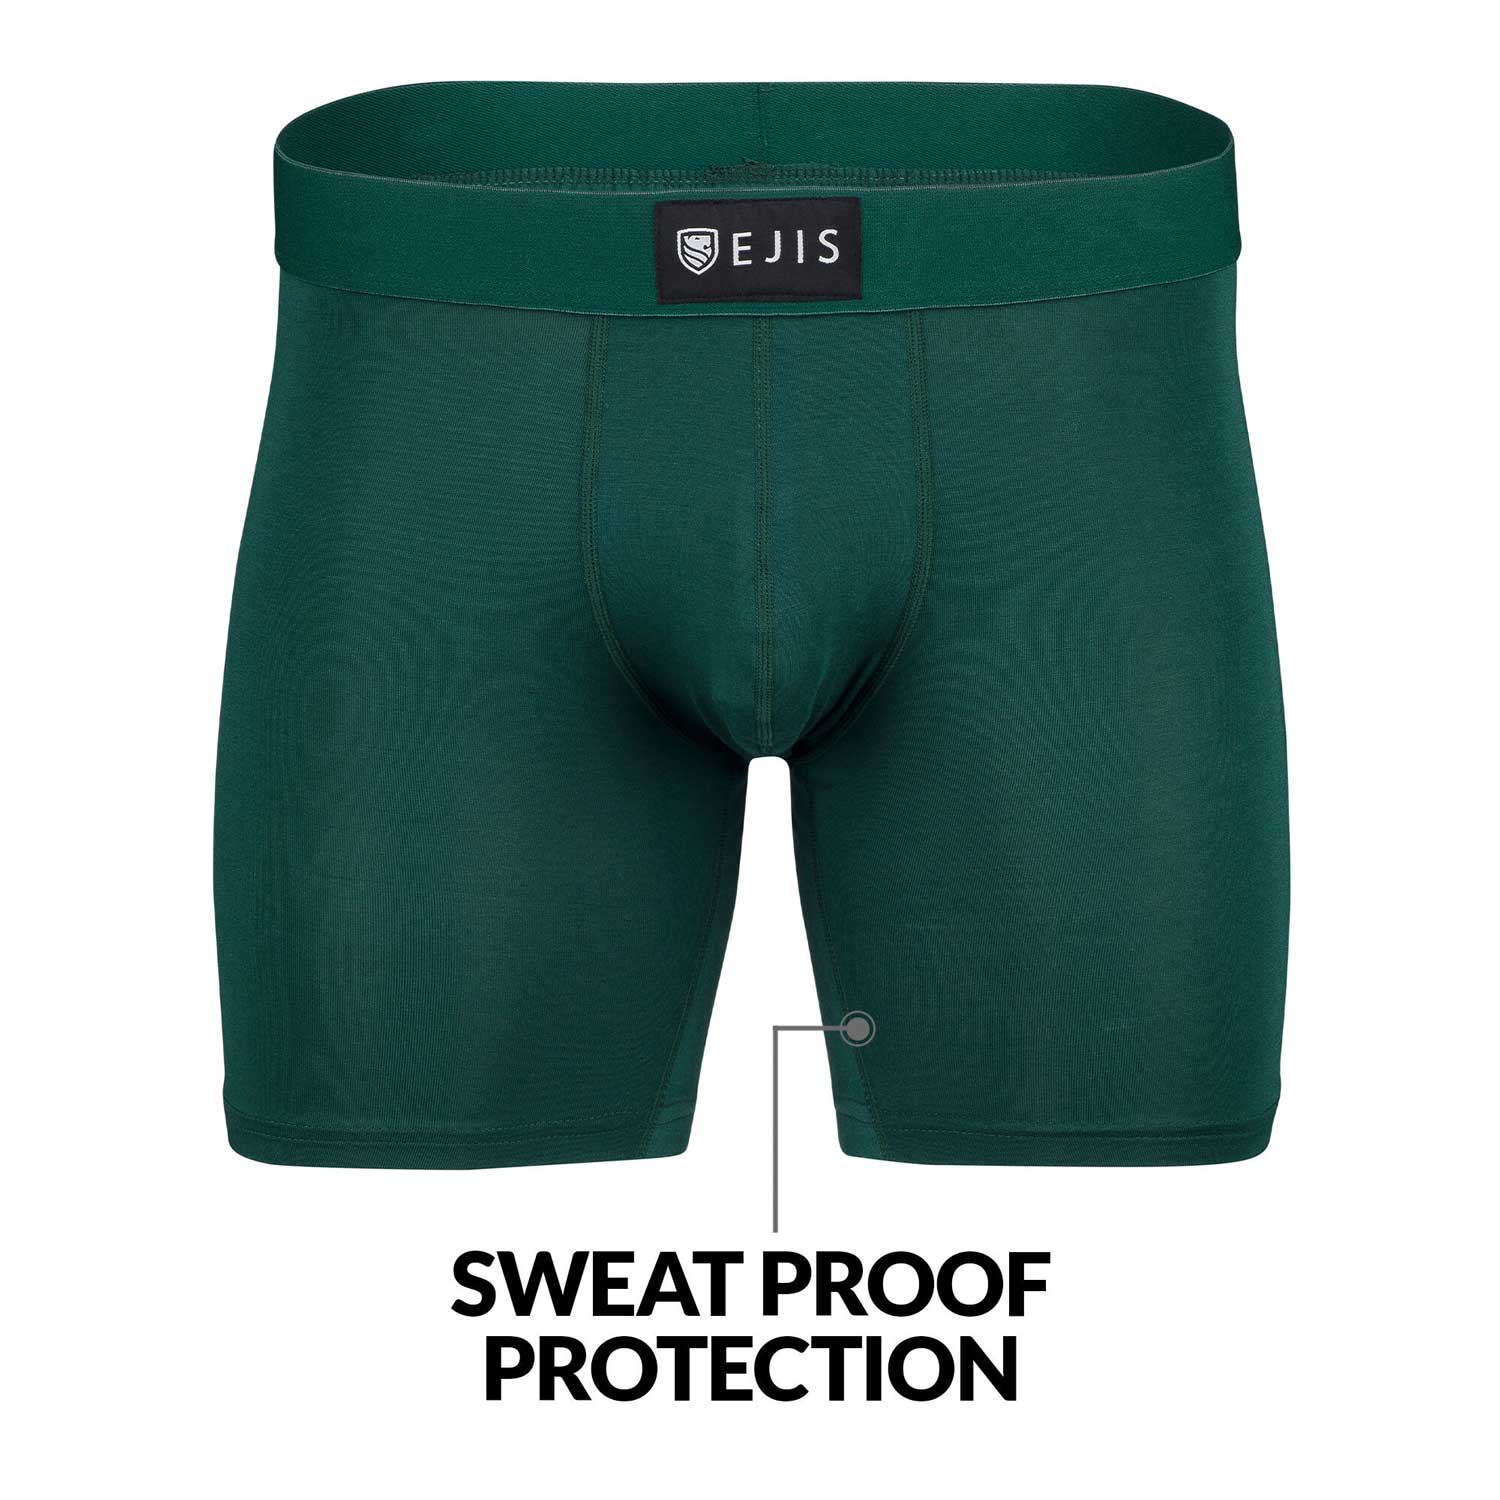 Ejis Sweat Proof Undershirts and Boxer Briefs. Get Some Wearable  Confidence! 